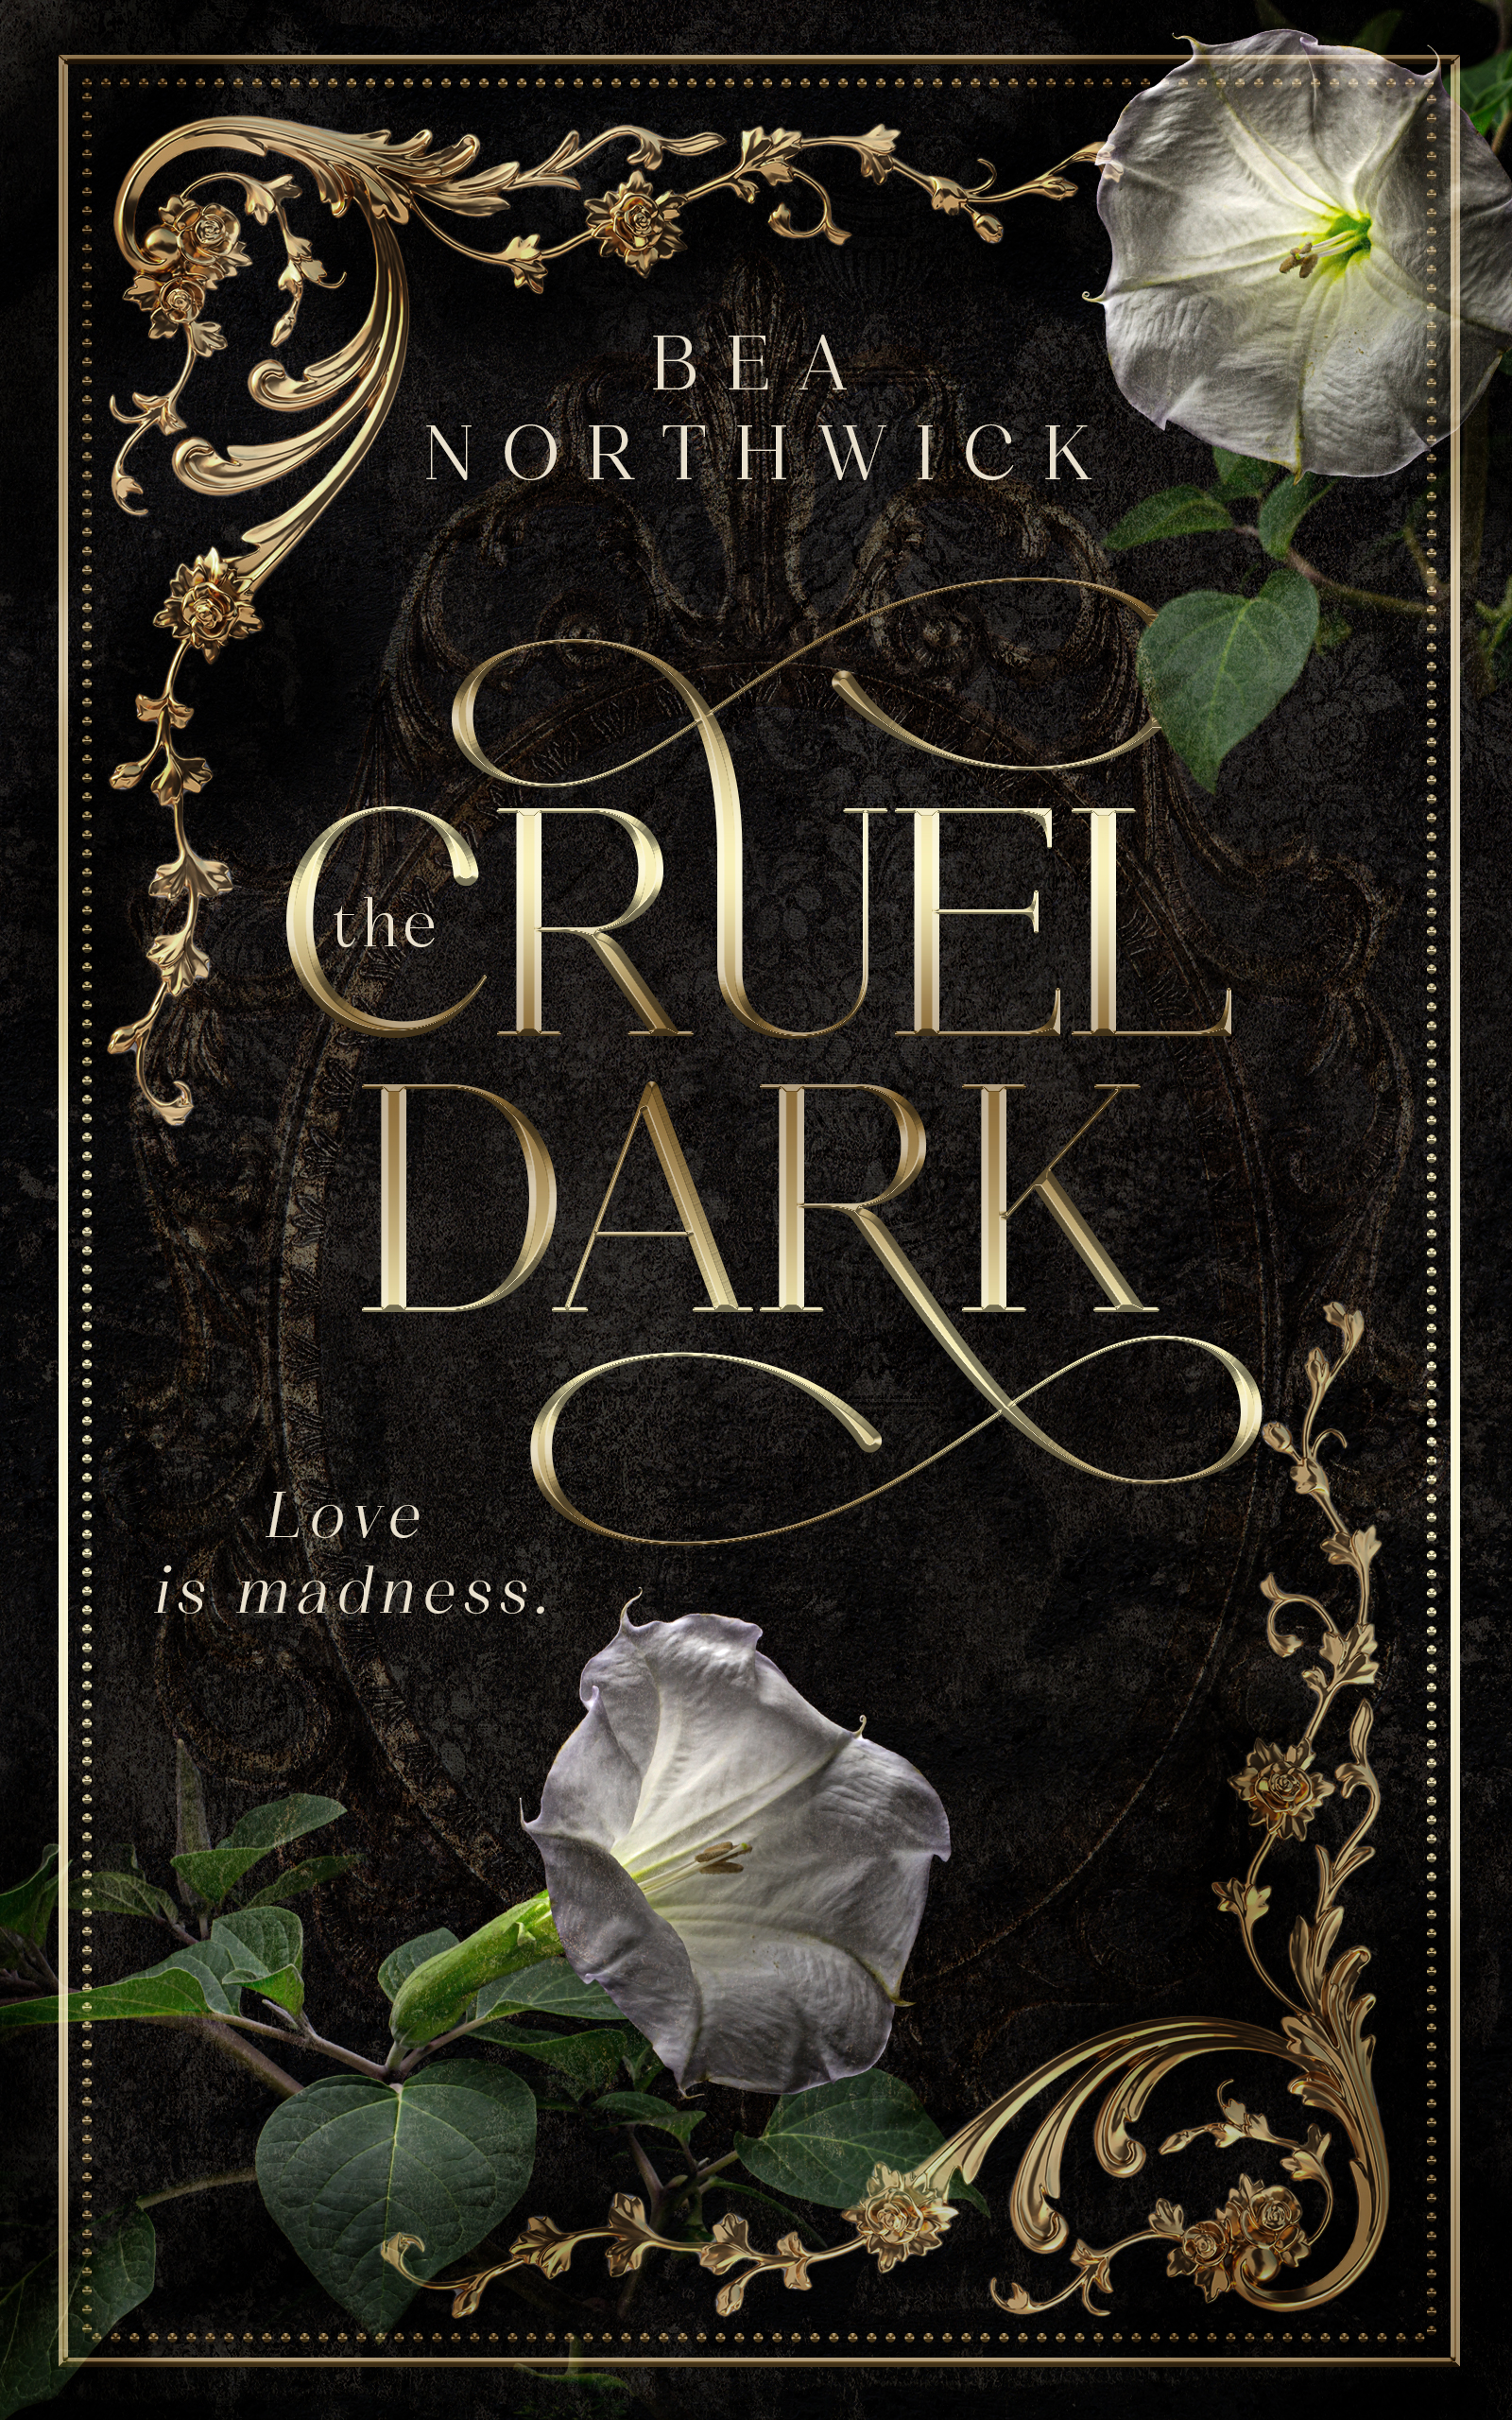 An autumn themed fantasy book cover design with dead leaves, yellow roses, and a rusted lock.